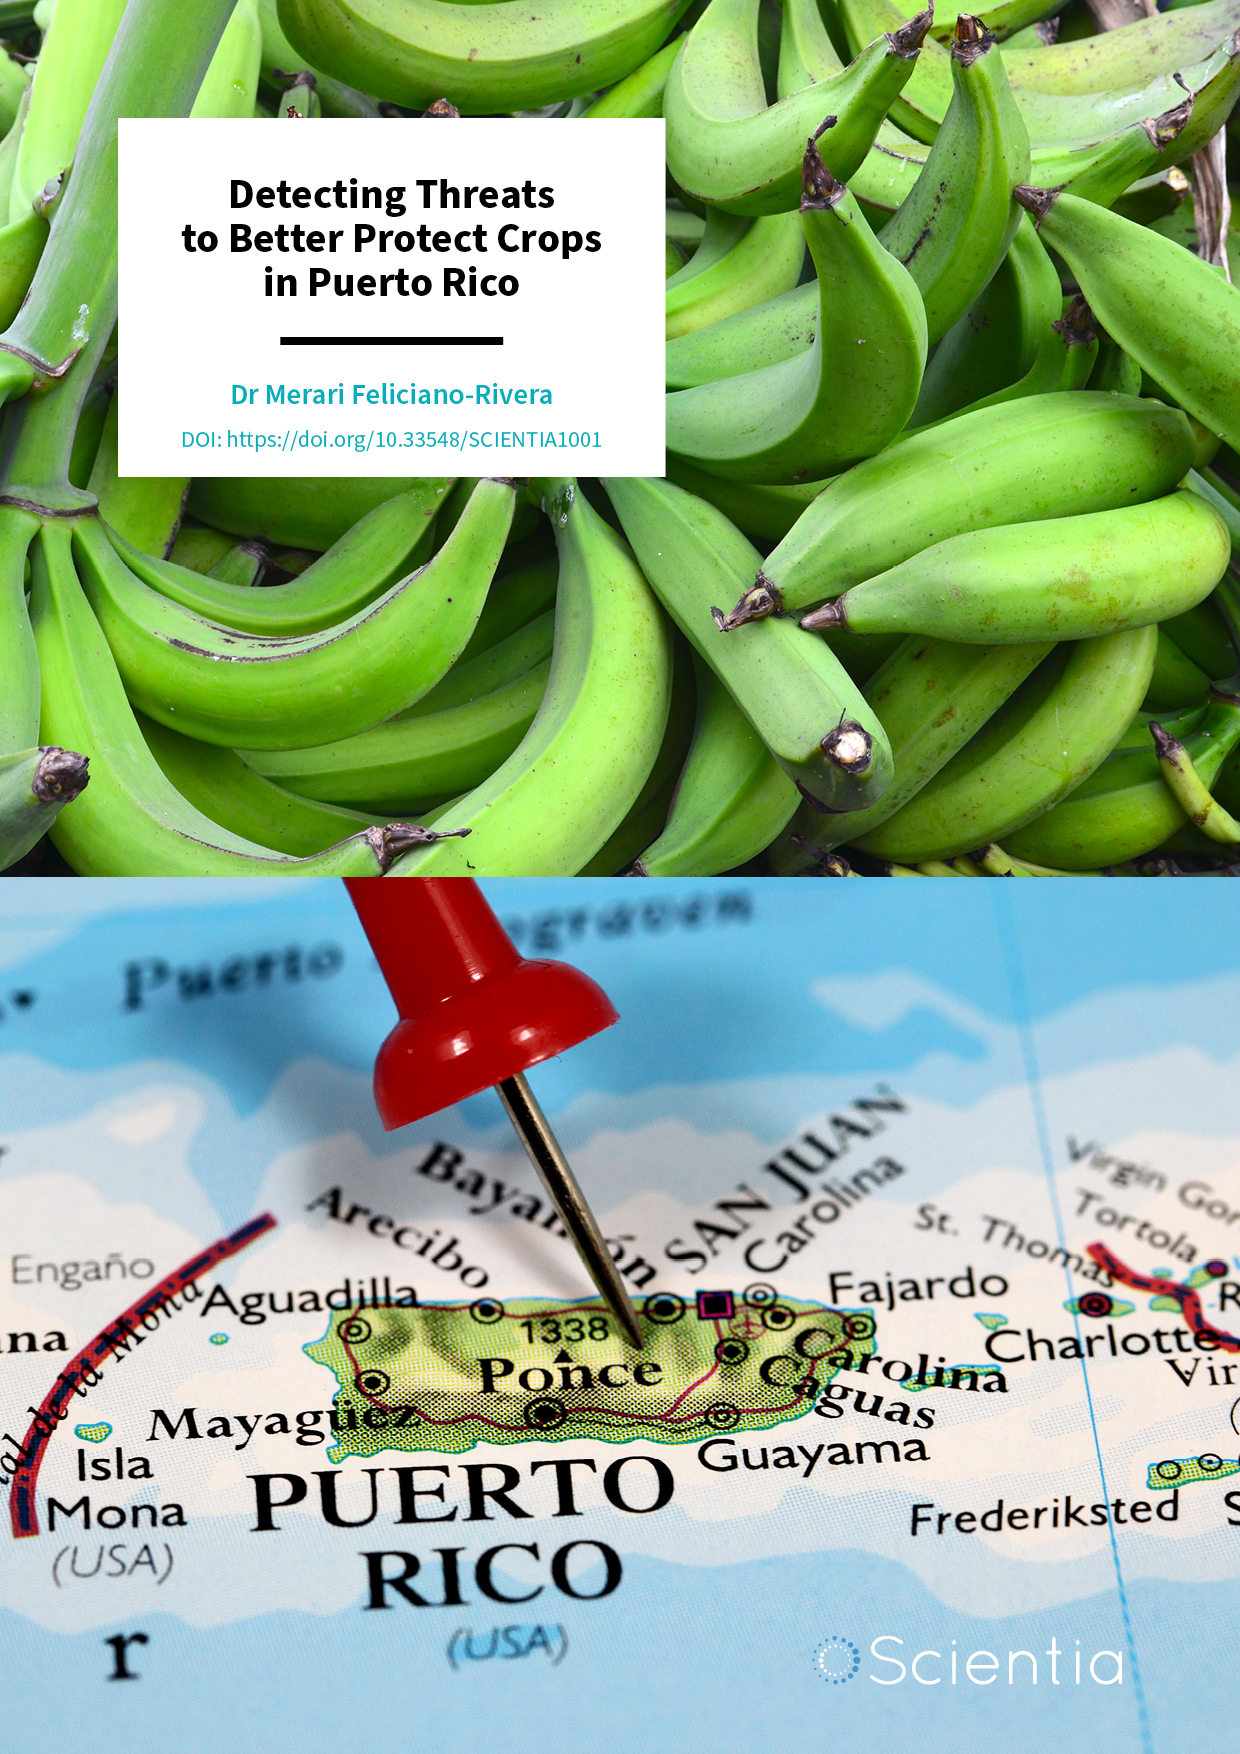 Dr Merari Feliciano-Rivera | Detecting Threats to Better Protect Crops in Puerto Rico